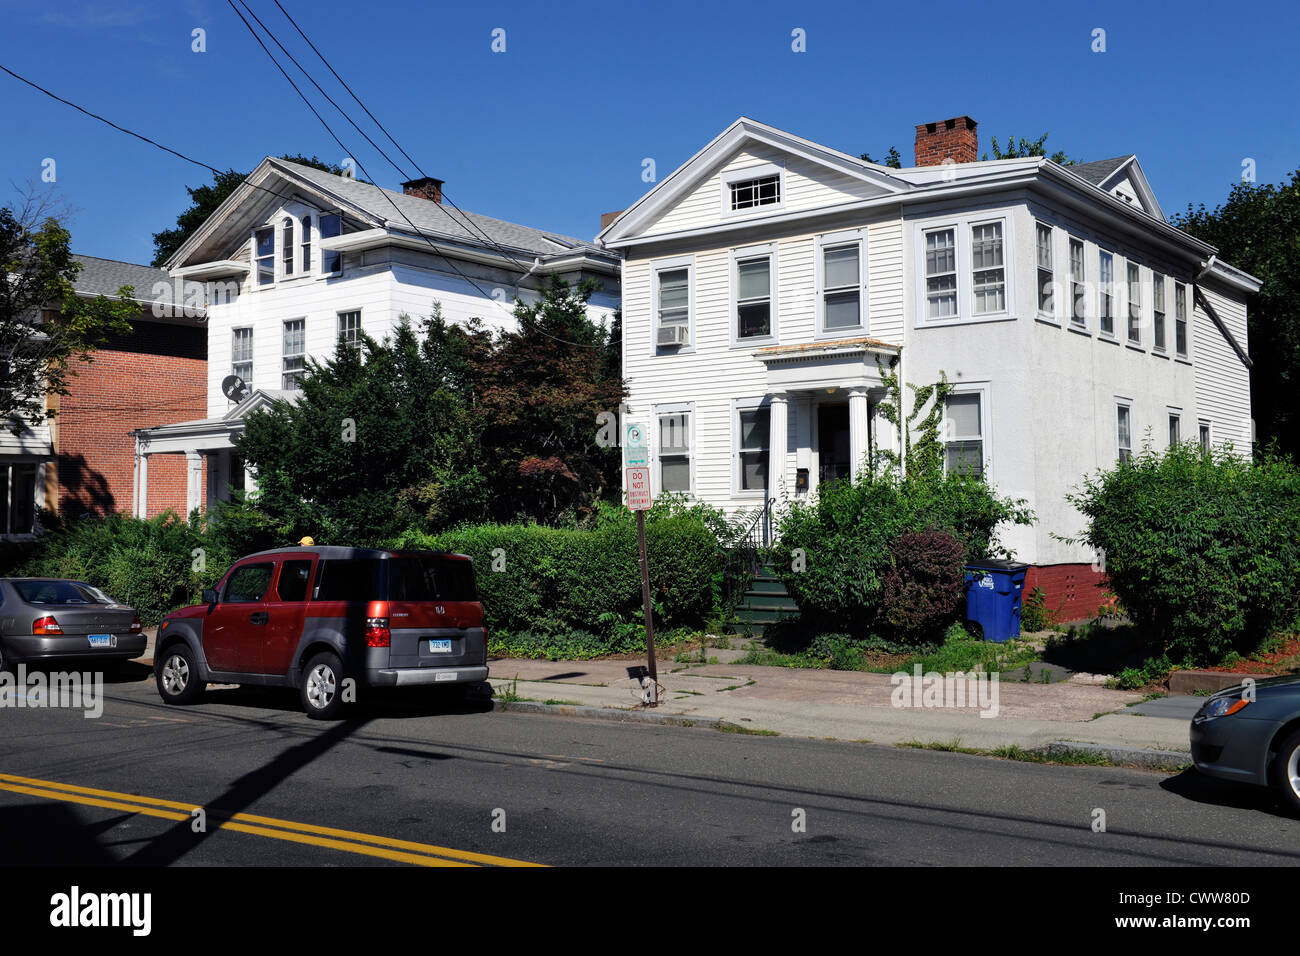 Residential houses in city neighborhood. New Haven, CT. Stock Photo